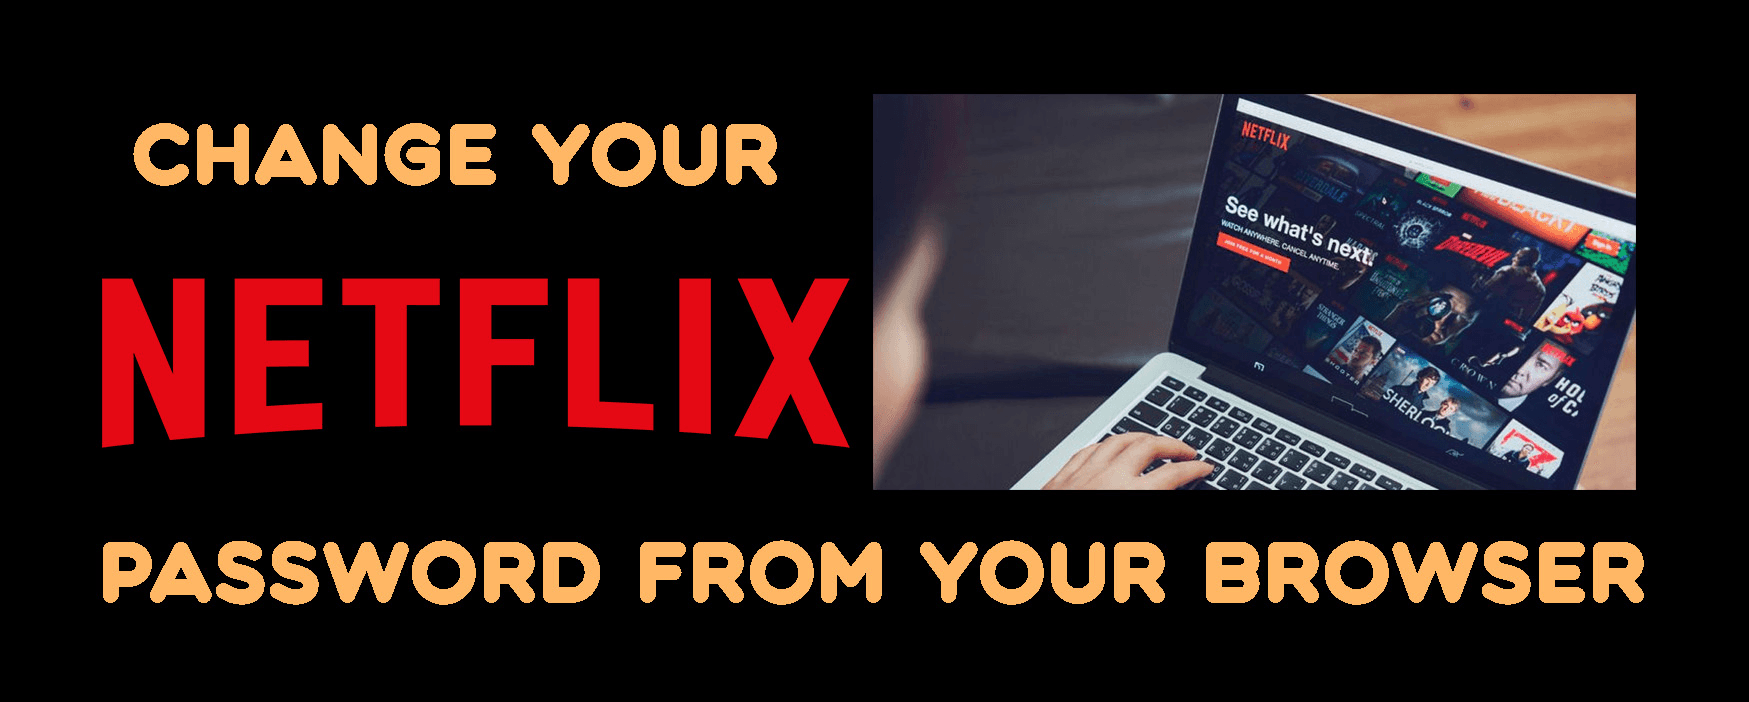 Change password or reset your password from password manager as Netflix suggests or on tech tutorials